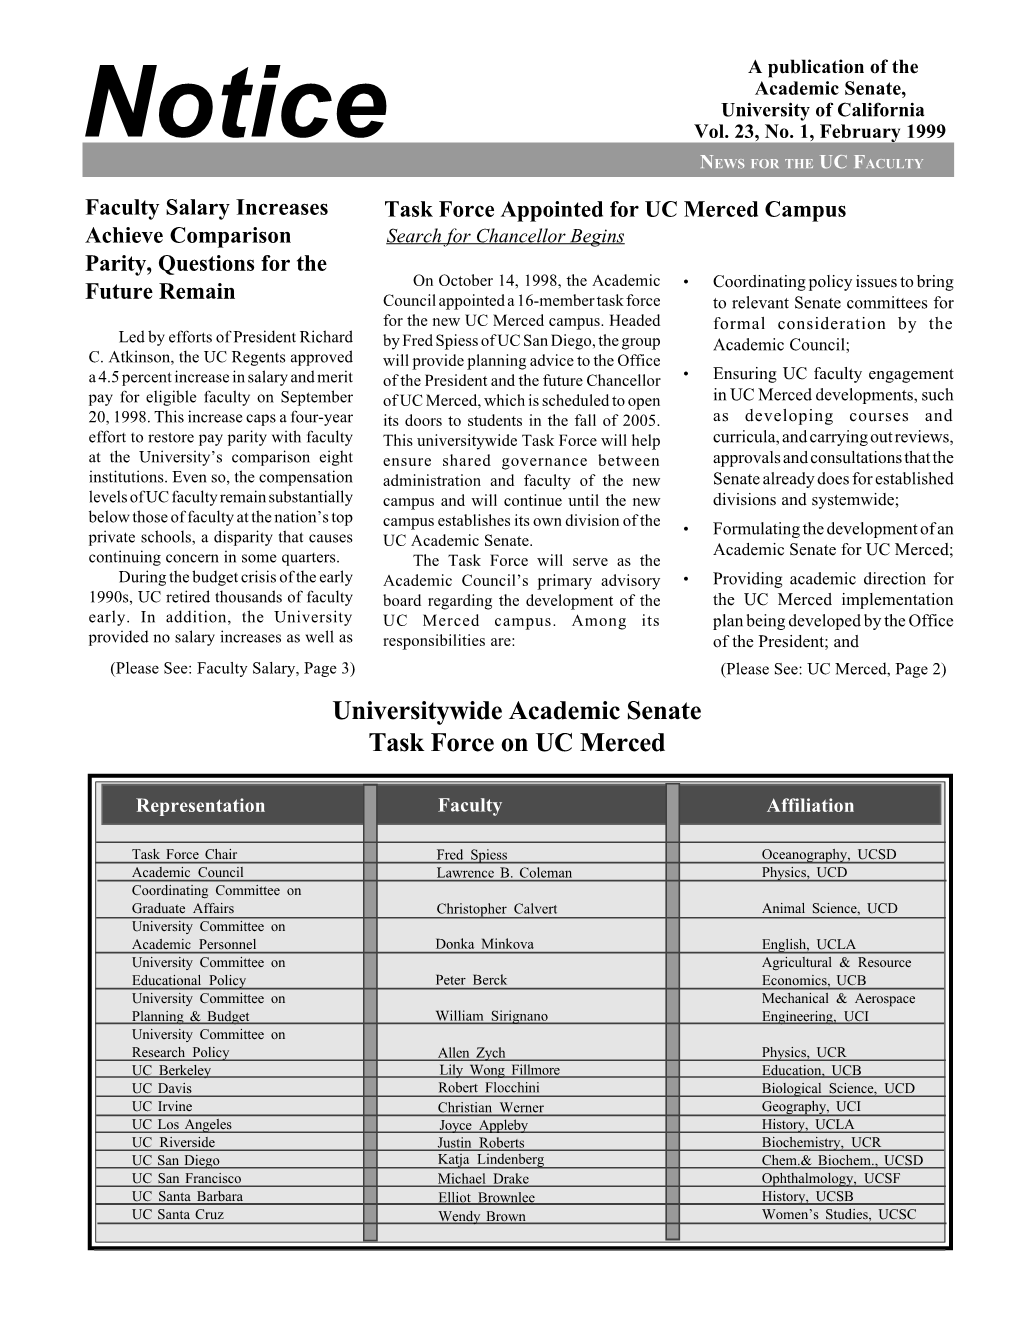 February 1999 NEWS for the UC FACULTY